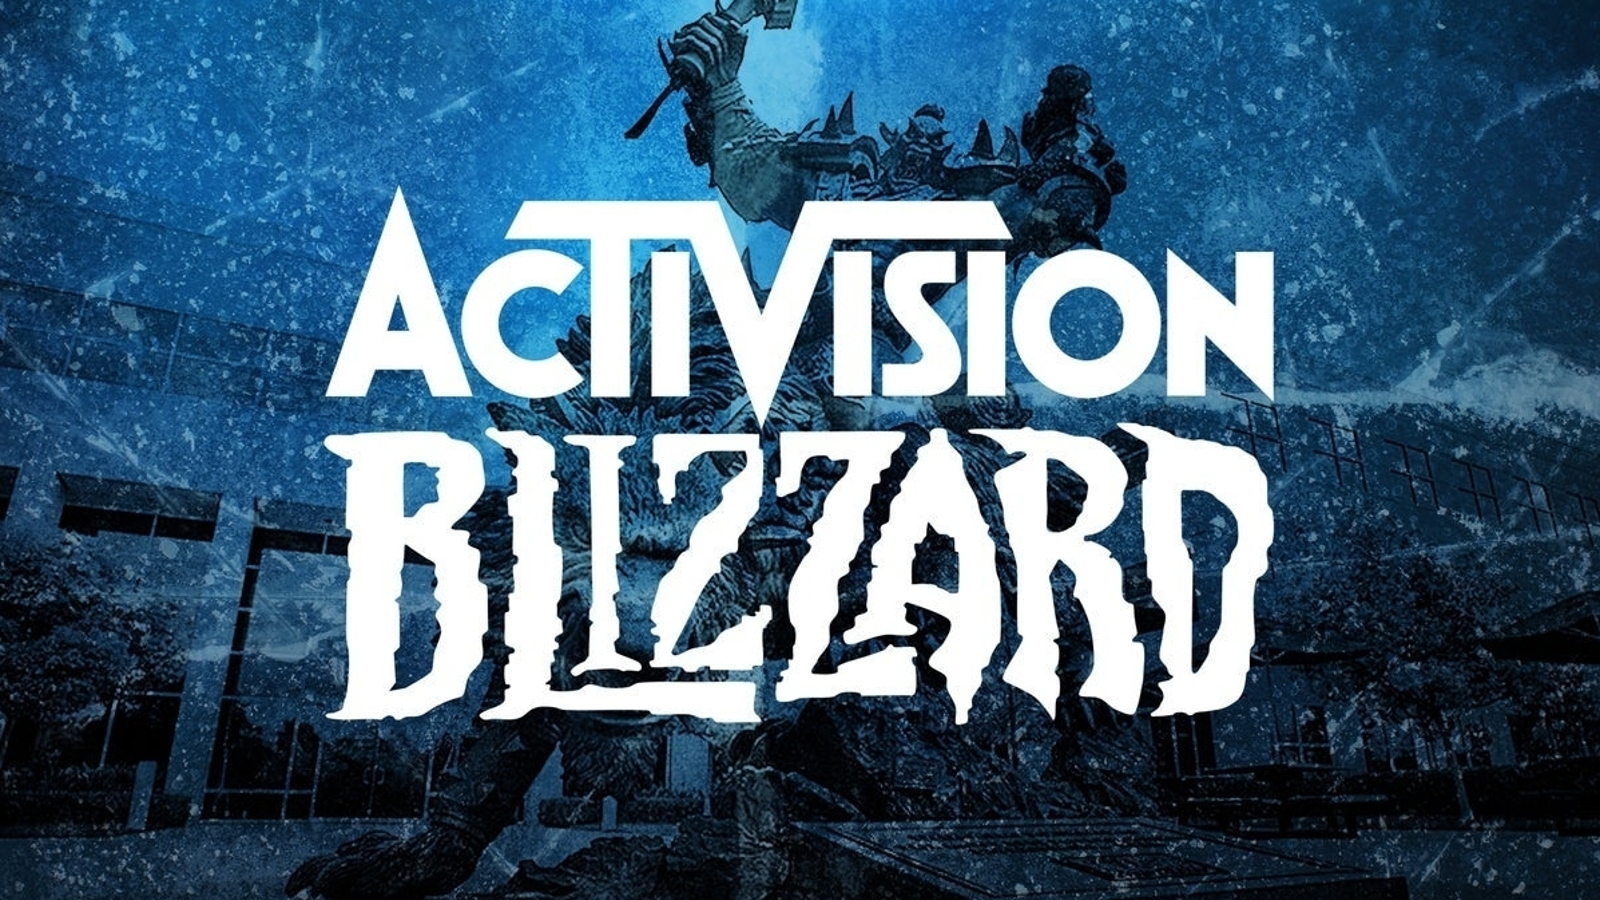 Daniel Ahmad on X: Activision Blizzard stock down 10% after hours